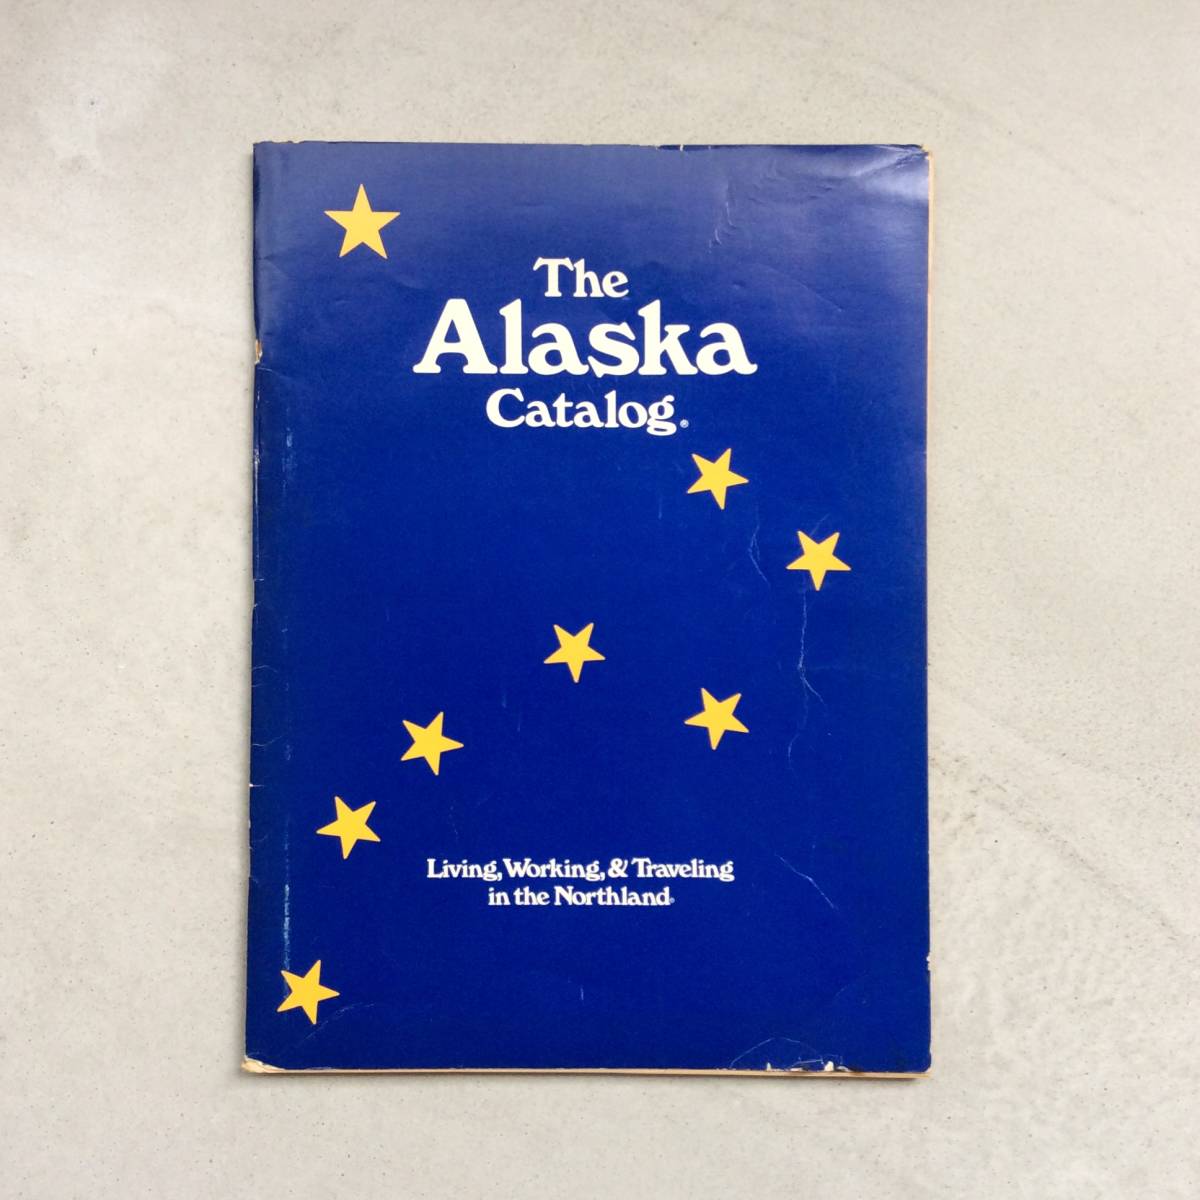 The Alaska Catalog: Living, Working, & Traveling in the Northland